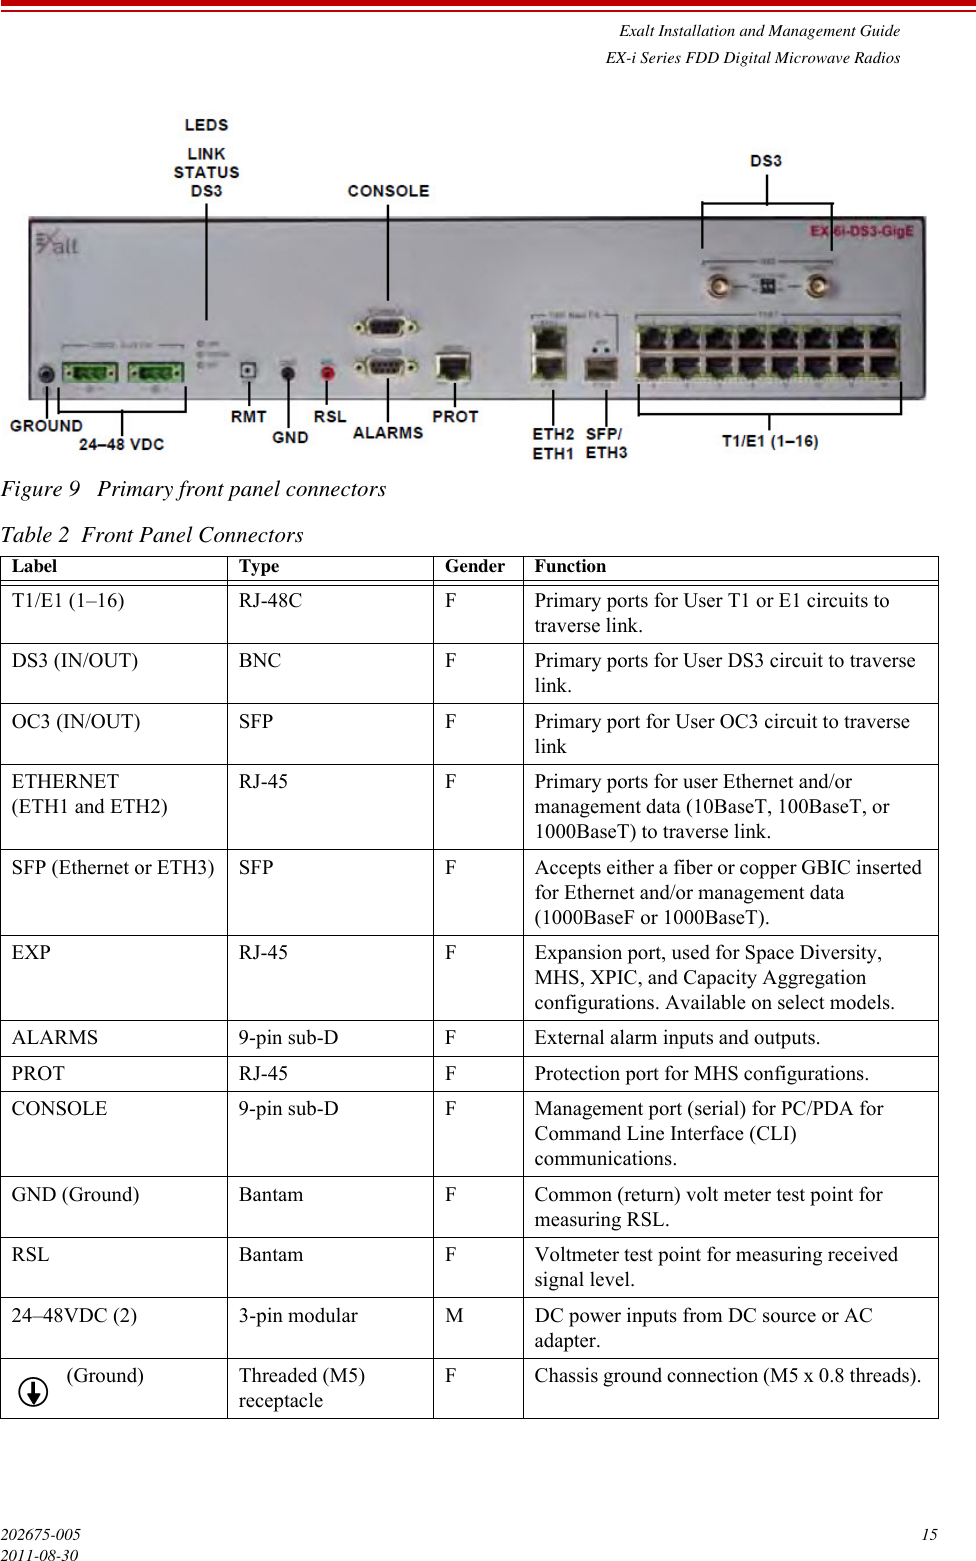 Exalt Installation and Management GuideEX-i Series FDD Digital Microwave Radios202675-005 152011-08-30Figure 9   Primary front panel connectorsTable 2  Front Panel ConnectorsLabel Type Gender Function T1/E1 (1–16)  RJ-48C  F  Primary ports for User T1 or E1 circuits to traverse link. DS3 (IN/OUT)  BNC  F  Primary ports for User DS3 circuit to traverse link. OC3 (IN/OUT)  SFP  F Primary port for User OC3 circuit to traverse linkETHERNET(ETH1 and ETH2) RJ-45  F  Primary ports for user Ethernet and/or management data (10BaseT, 100BaseT, or 1000BaseT) to traverse link. SFP (Ethernet or ETH3) SFP F  Accepts either a fiber or copper GBIC inserted for Ethernet and/or management data (1000BaseF or 1000BaseT).EXP RJ-45 F Expansion port, used for Space Diversity, MHS, XPIC, and Capacity Aggregation configurations. Available on select models.ALARMS  9-pin sub-D  F  External alarm inputs and outputs. PROT RJ-45 F Protection port for MHS configurations.CONSOLE 9-pin sub-D F Management port (serial) for PC/PDA for Command Line Interface (CLI) communications. GND (Ground)  Bantam  F  Common (return) volt meter test point for measuring RSL. RSL Bantam F Voltmeter test point for measuring received signal level. 24–48VDC (2) 3-pin modular  M  DC power inputs from DC source or AC adapter. (Ground) Threaded (M5) receptacle F  Chassis ground connection (M5 x 0.8 threads). 